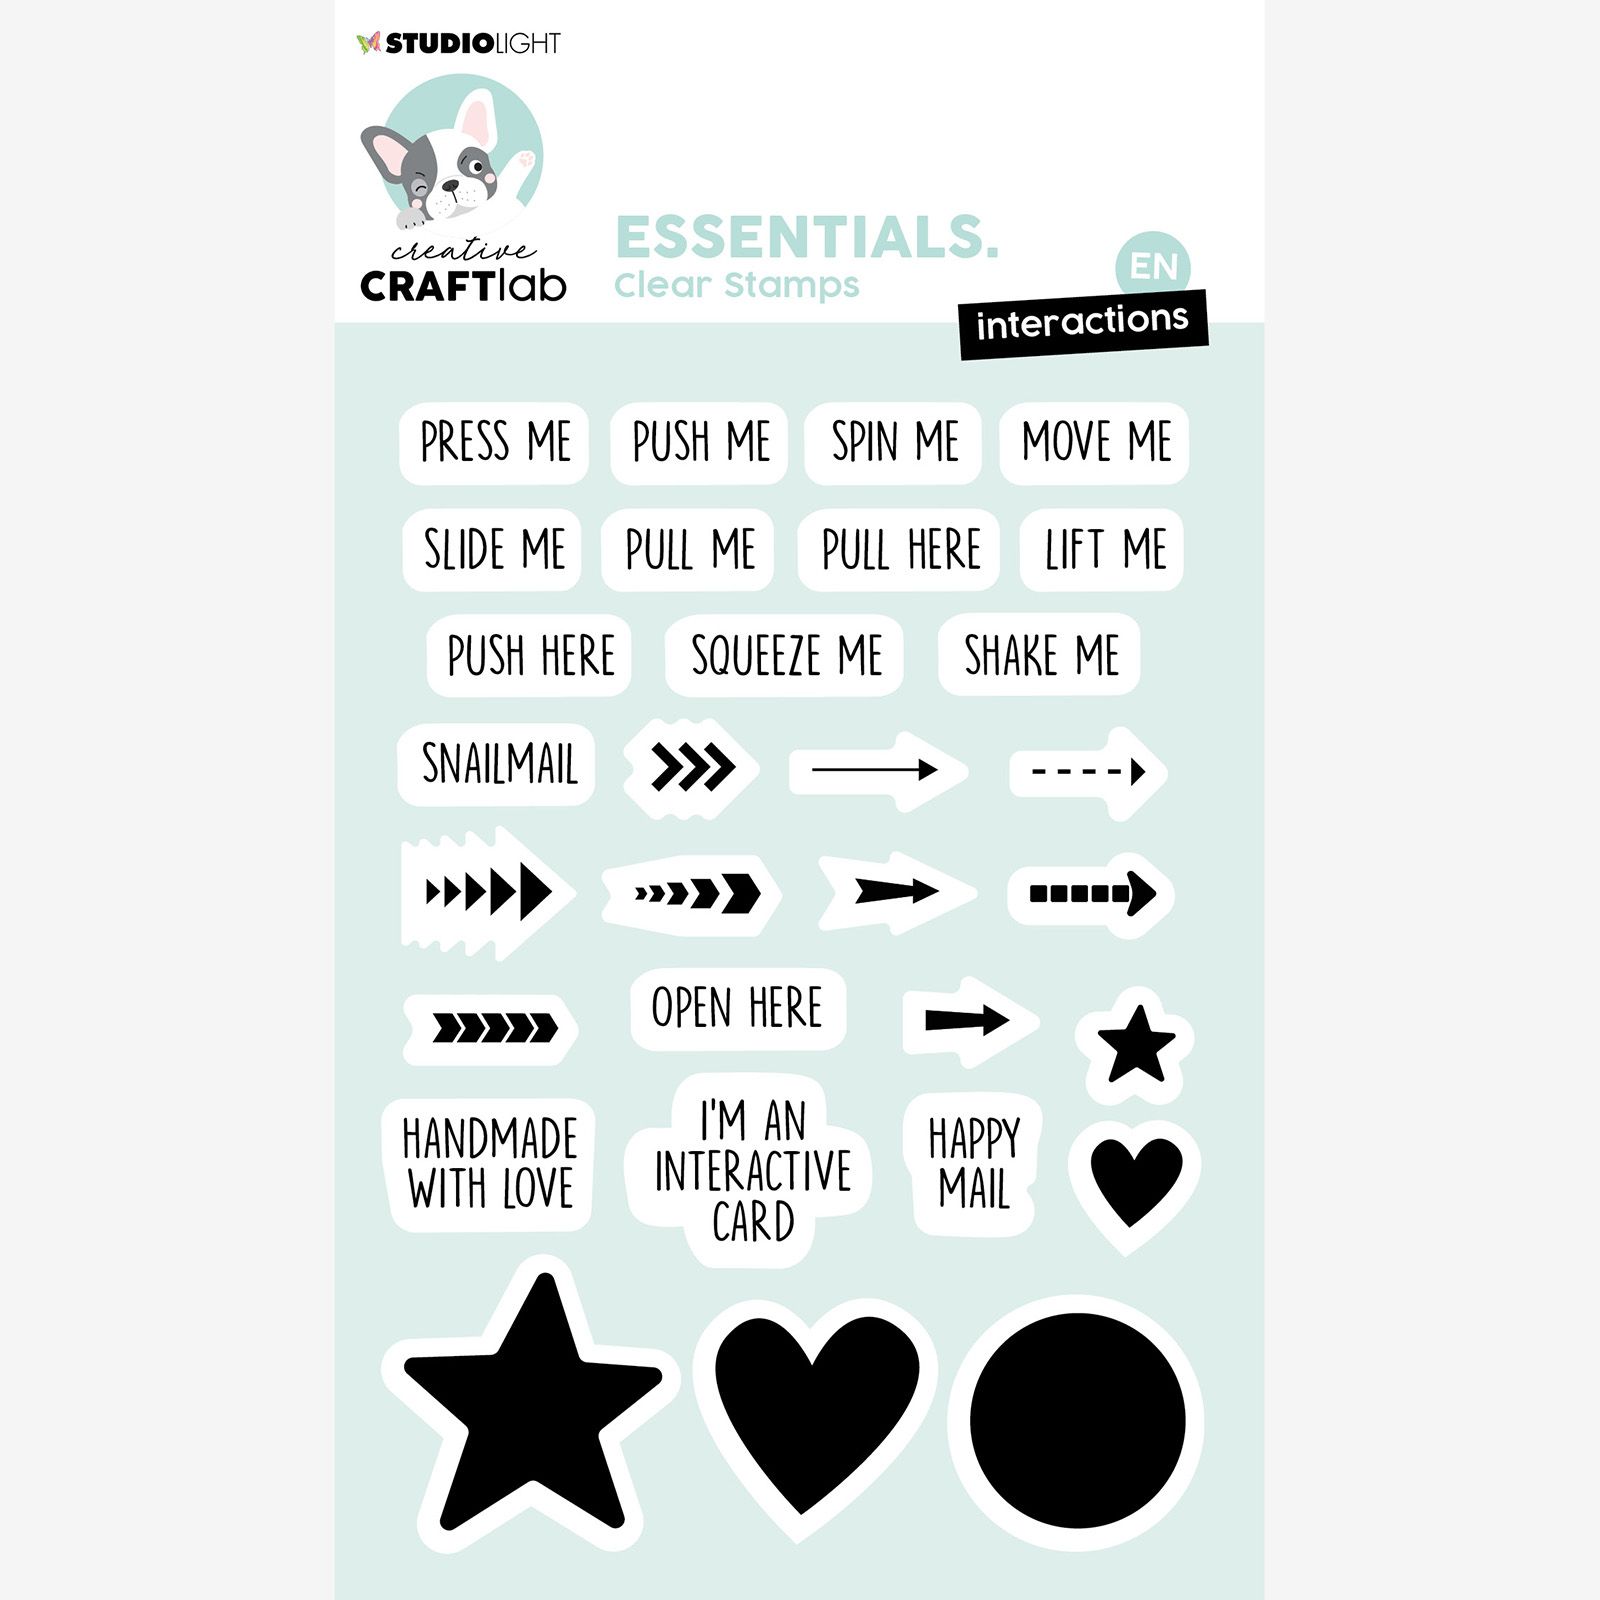 Creative Craftlab • Essentials Clear Stempel Text Interactions For Slider Pop-Up